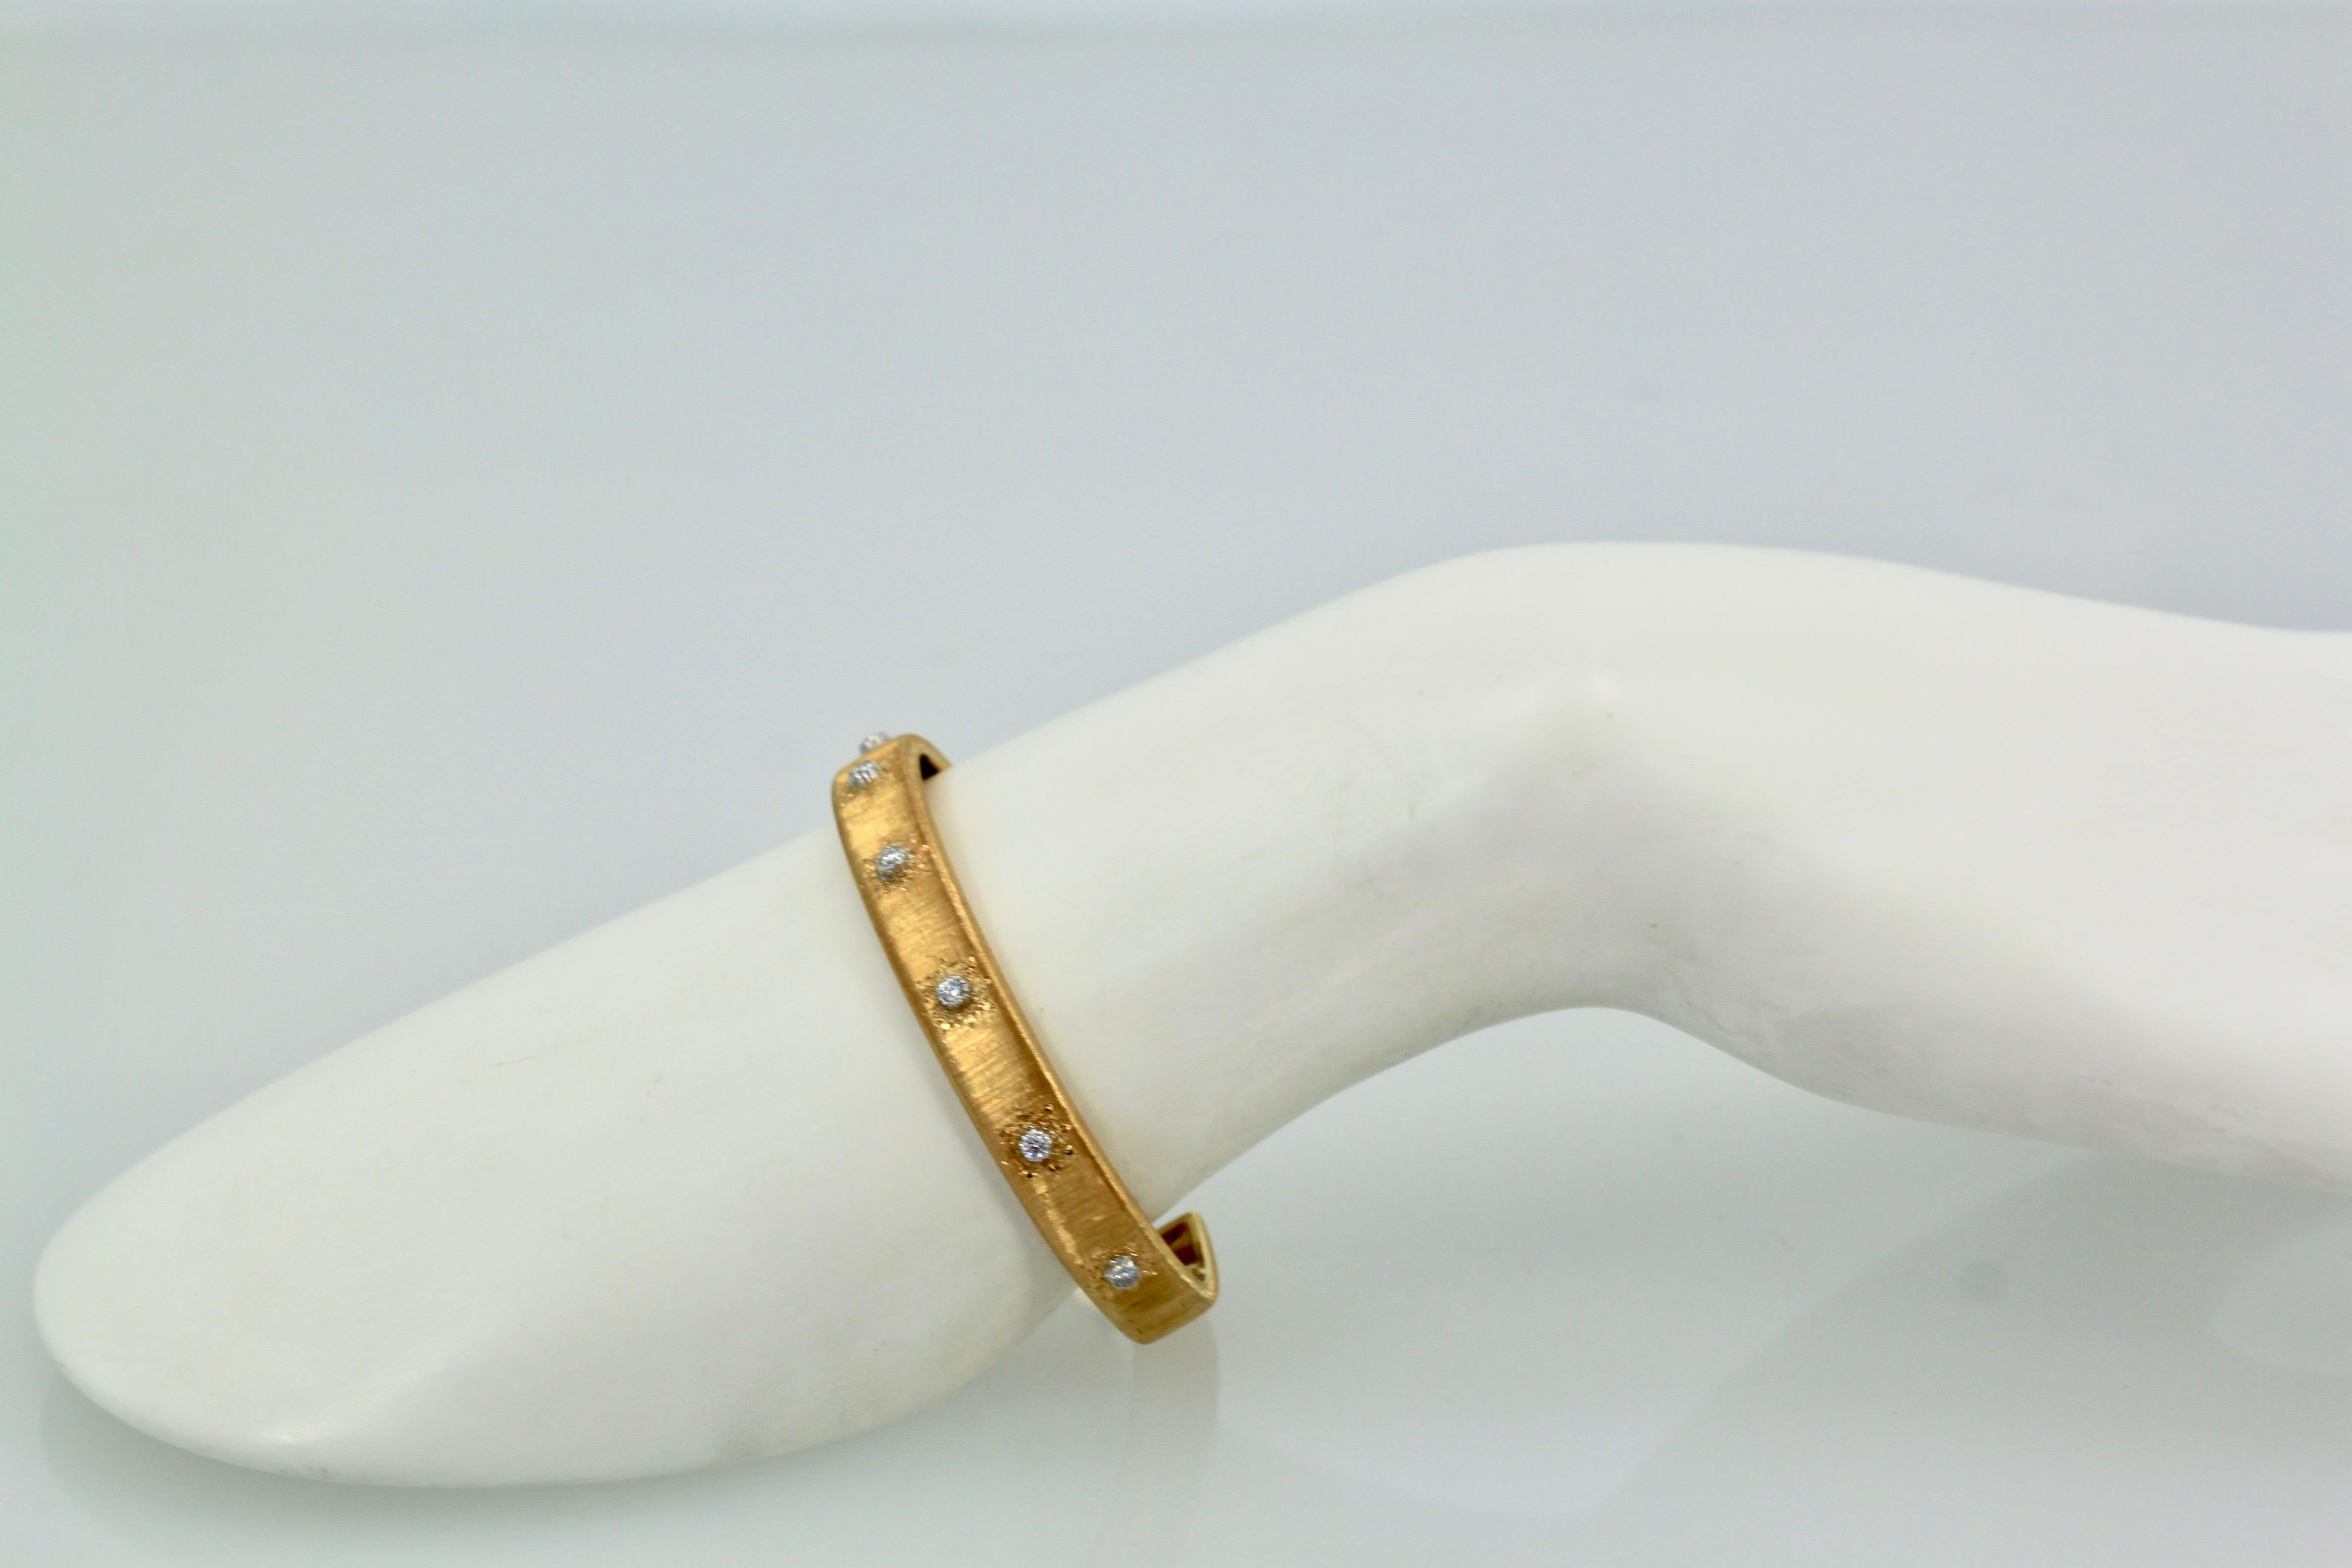 This lovely Buccellati Classica Rigato Bracelet was my first Buccellati Bracelet purchased many years ago..  It is small but a perfect compliment to any other bracelet.  This is the classica style with their signature burin engraving.  This bracelet